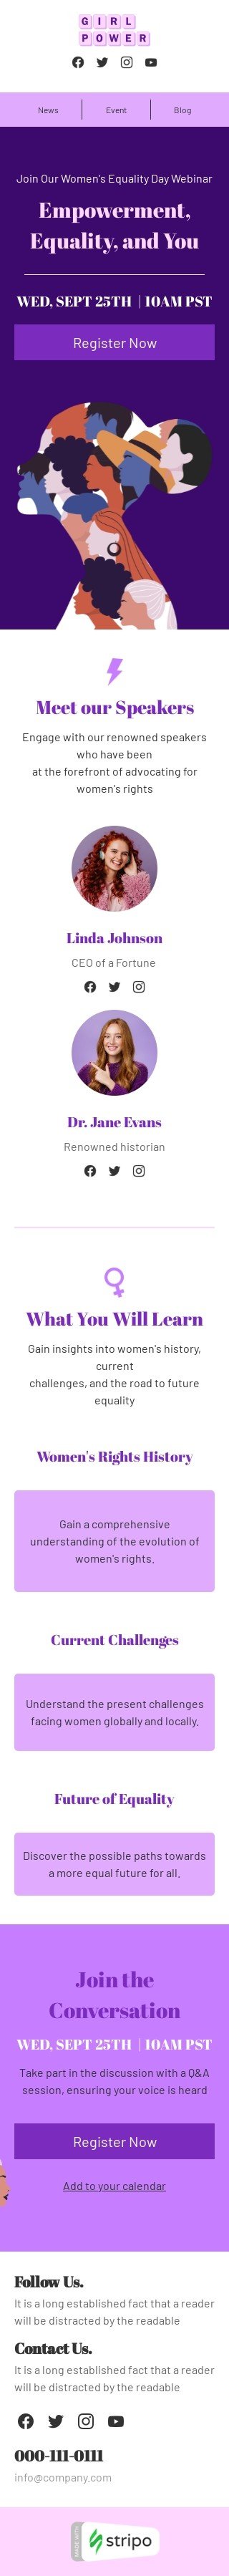 Women's Equality Day email template "Empowerment, equality, and you" for webinars industry mobile view